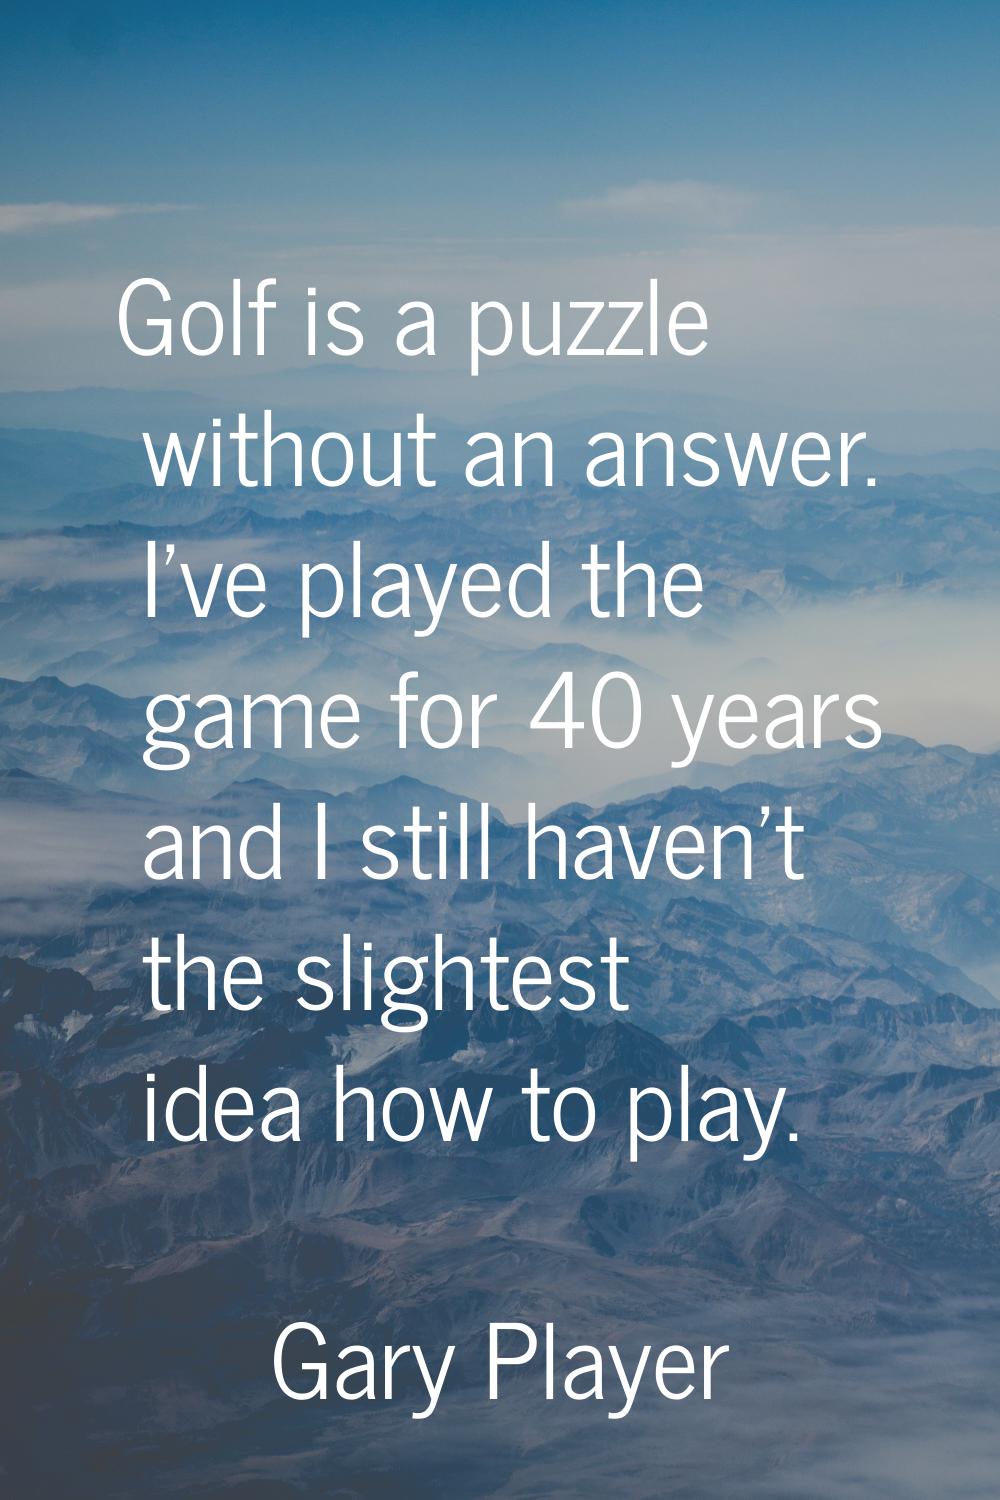 Golf is a puzzle without an answer. I've played the game for 40 years and I still haven't the sligh